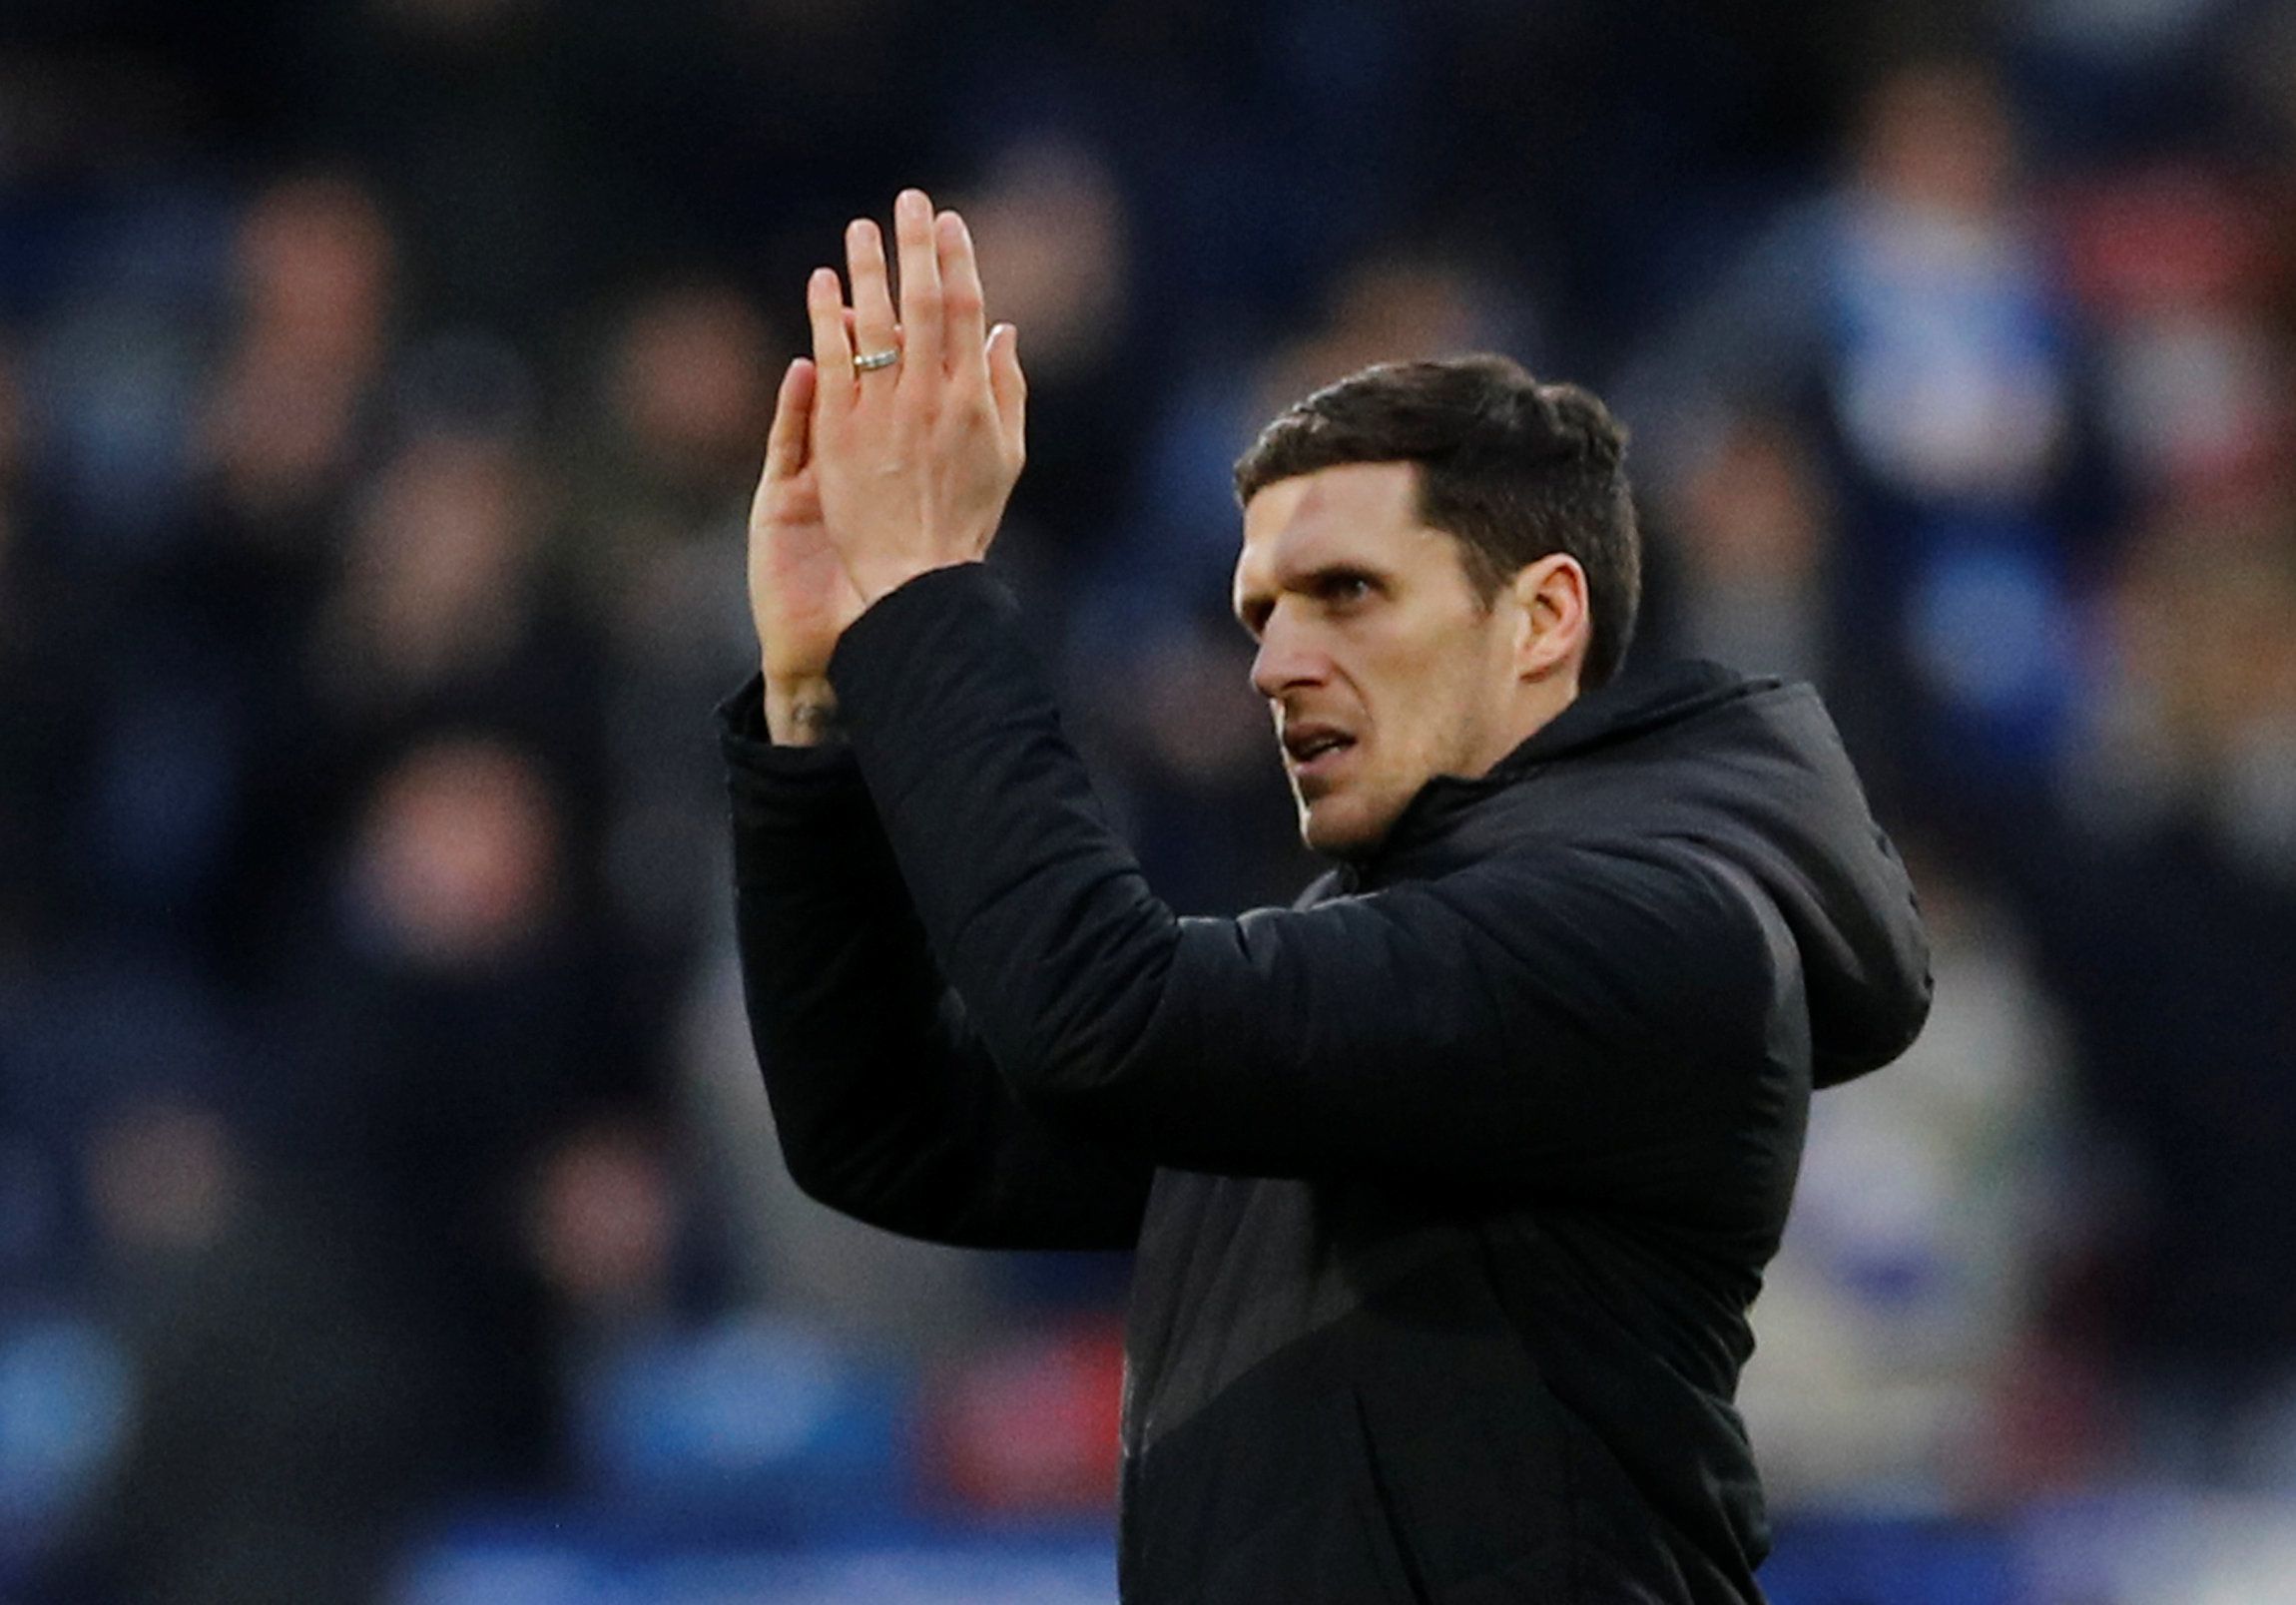 Soccer Football - Premier League - Huddersfield Town v Manchester City - John Smith's Stadium, Huddersfield, Britain - January 20, 2019  Huddersfield Town caretaker manager Mark Hudson applauds the fans at the end of the match   REUTERS/Phil Noble  EDITORIAL USE ONLY. No use with unauthorized audio, video, data, fixture lists, club/league logos or 